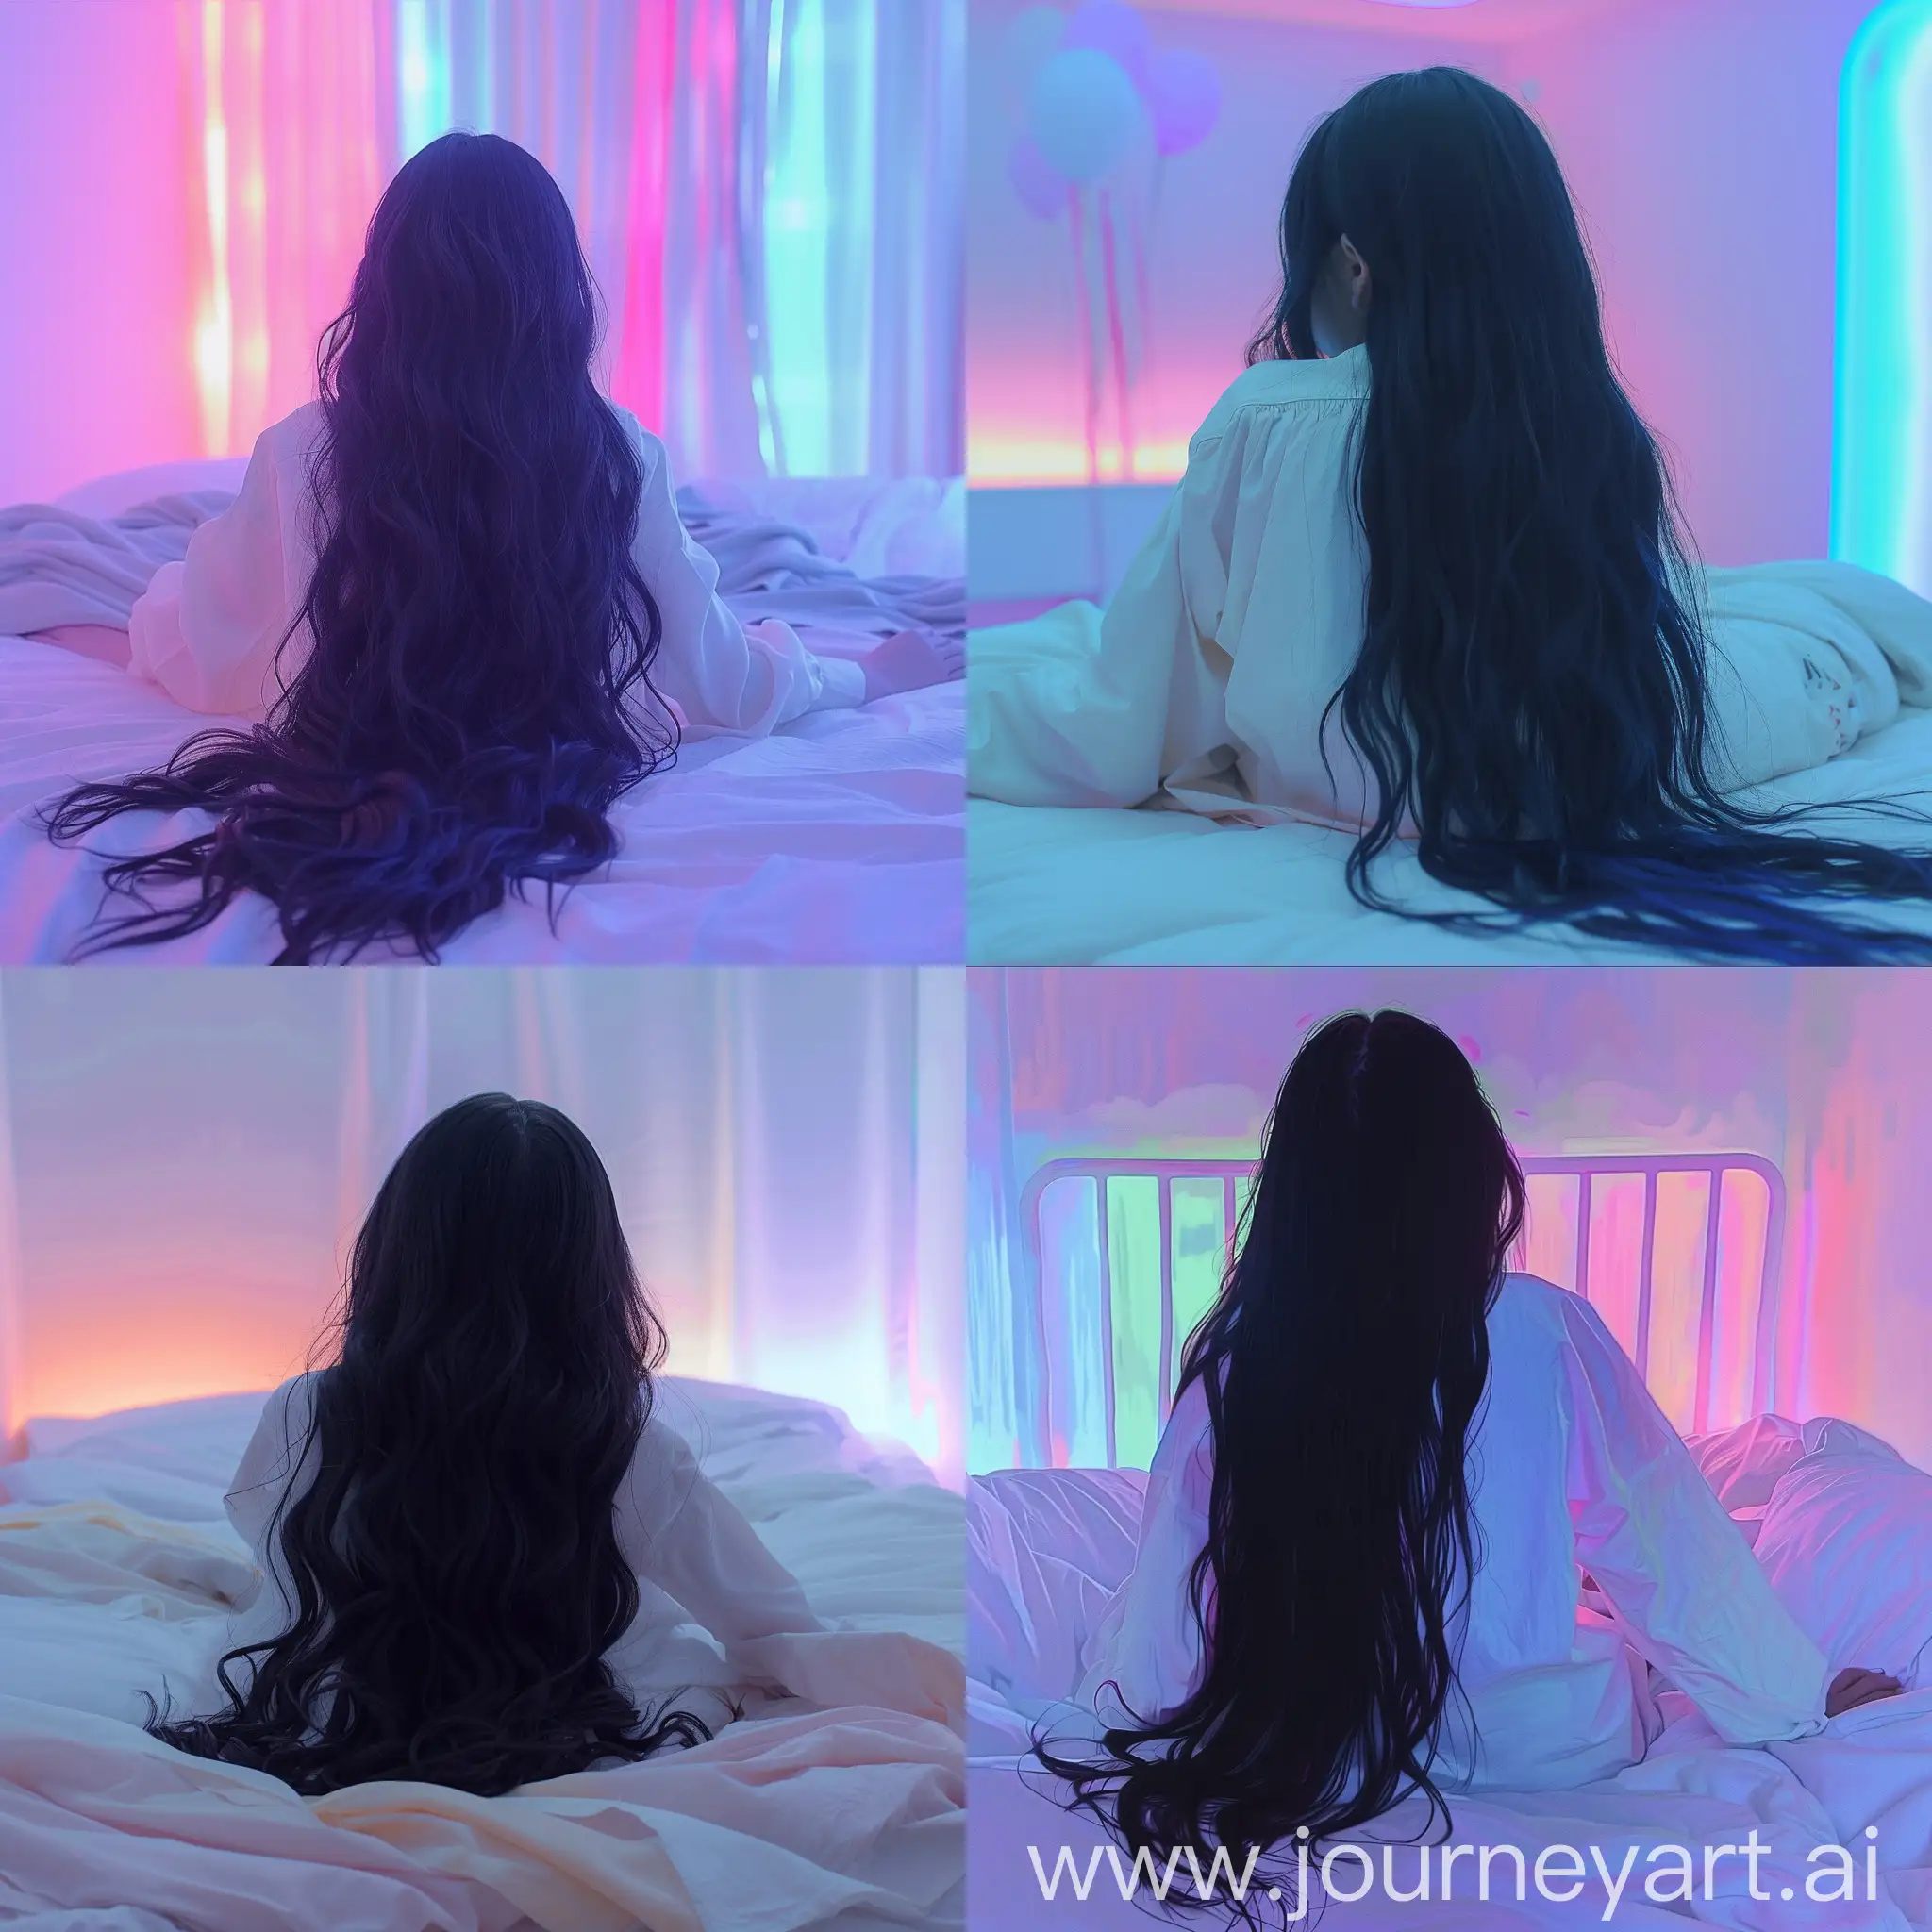 Girl-with-Long-Black-Hair-Laying-in-Pastel-Lit-Room